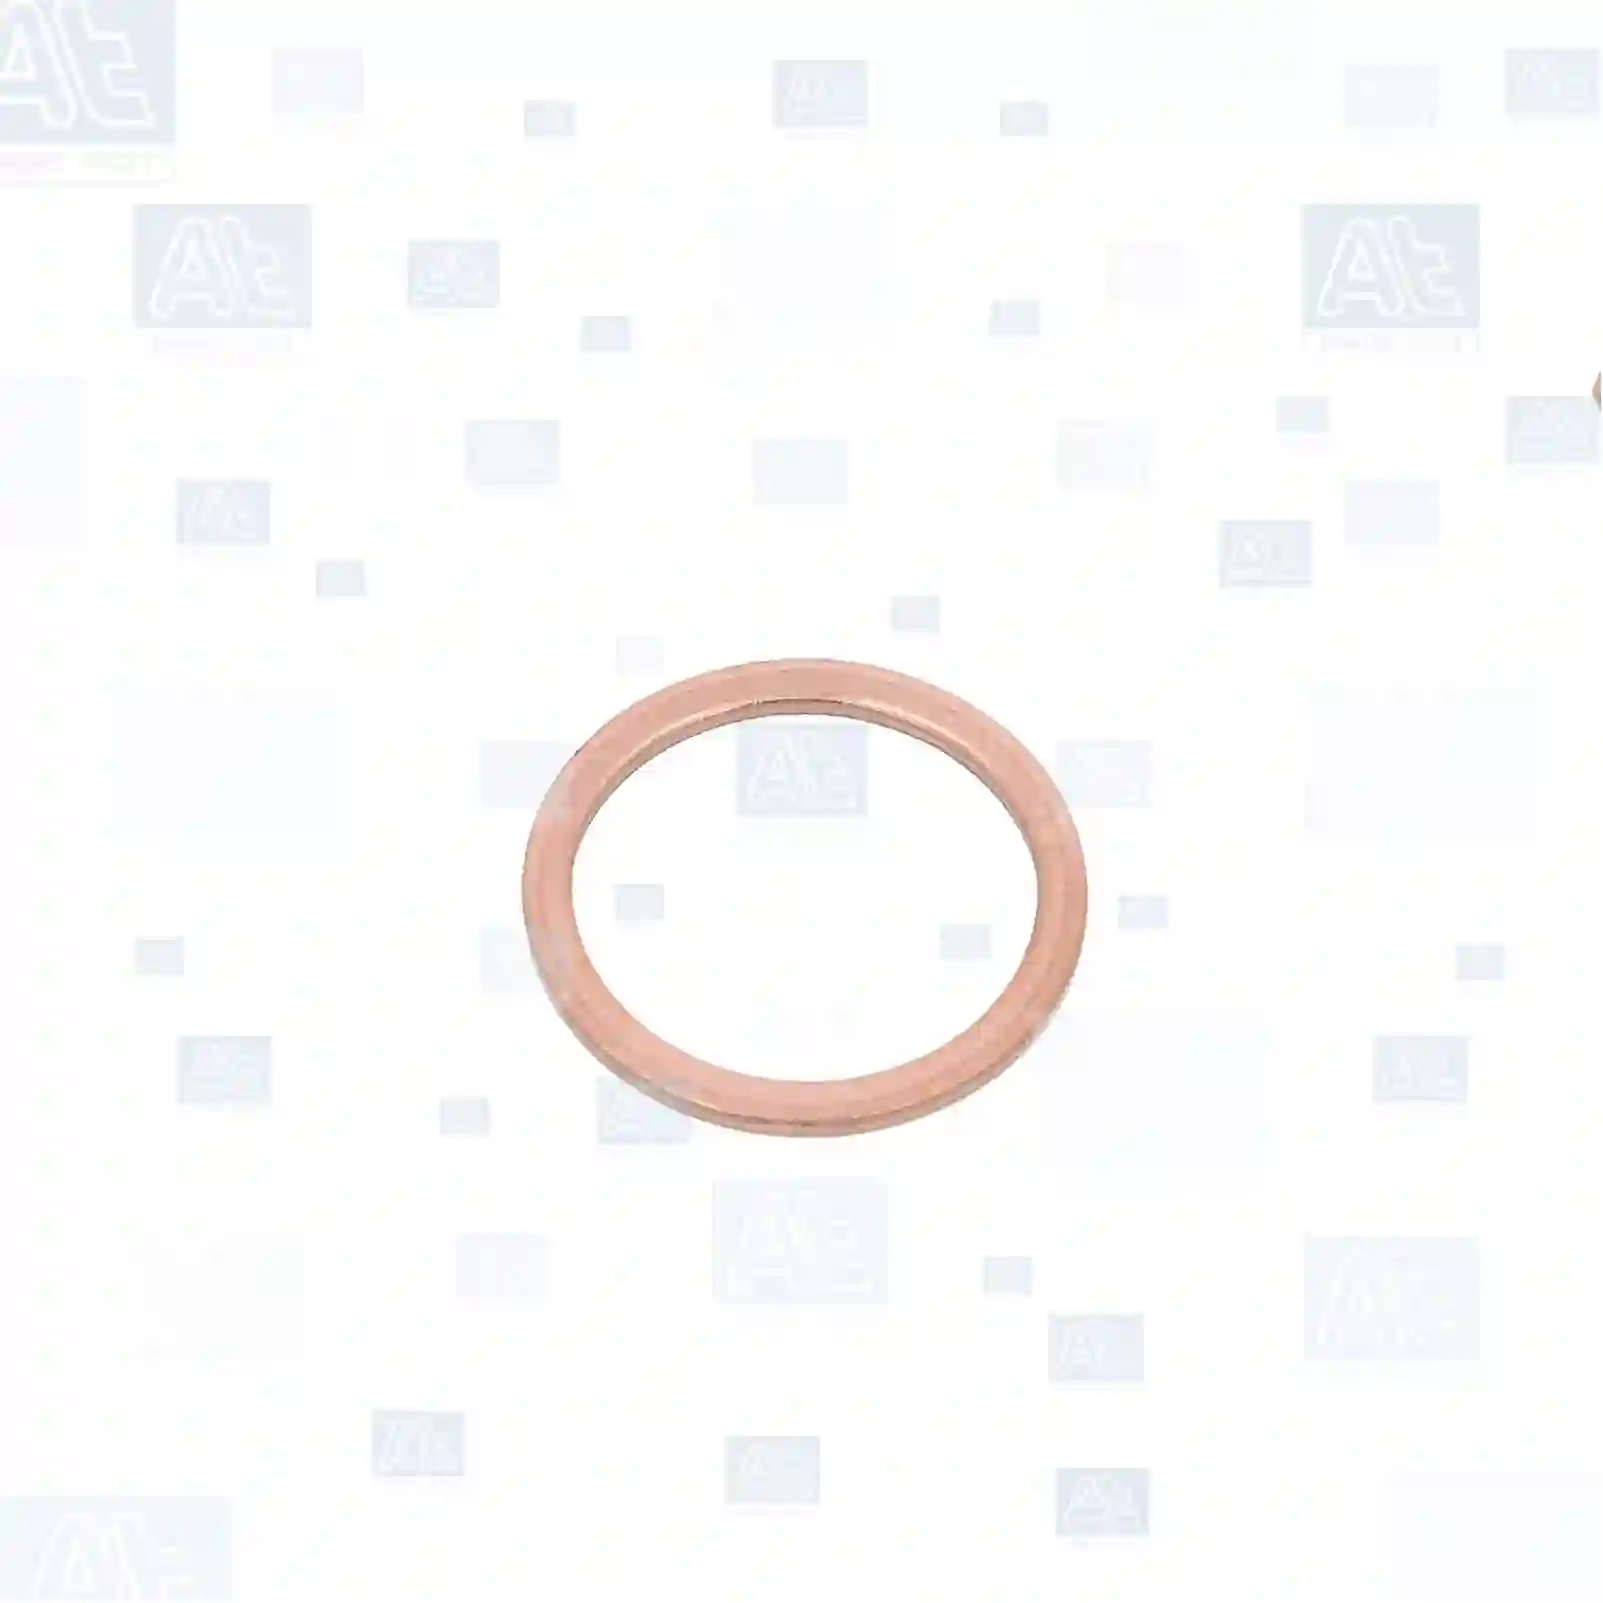 Copper washer, 77700291, 234032246, GX0146301A, 331335, 01118748, 01118754, 10264560, 0996731130, 670891C1, 01118748, 01118754, 06561900723, 01118748, 604920102429, GX0146301A, 0703305000, 0946721306, 7400018813, 7400949329, 812419, 18813, 240017, 6631087, 949329, ZG01007-0008 ||  77700291 At Spare Part | Engine, Accelerator Pedal, Camshaft, Connecting Rod, Crankcase, Crankshaft, Cylinder Head, Engine Suspension Mountings, Exhaust Manifold, Exhaust Gas Recirculation, Filter Kits, Flywheel Housing, General Overhaul Kits, Engine, Intake Manifold, Oil Cleaner, Oil Cooler, Oil Filter, Oil Pump, Oil Sump, Piston & Liner, Sensor & Switch, Timing Case, Turbocharger, Cooling System, Belt Tensioner, Coolant Filter, Coolant Pipe, Corrosion Prevention Agent, Drive, Expansion Tank, Fan, Intercooler, Monitors & Gauges, Radiator, Thermostat, V-Belt / Timing belt, Water Pump, Fuel System, Electronical Injector Unit, Feed Pump, Fuel Filter, cpl., Fuel Gauge Sender,  Fuel Line, Fuel Pump, Fuel Tank, Injection Line Kit, Injection Pump, Exhaust System, Clutch & Pedal, Gearbox, Propeller Shaft, Axles, Brake System, Hubs & Wheels, Suspension, Leaf Spring, Universal Parts / Accessories, Steering, Electrical System, Cabin Copper washer, 77700291, 234032246, GX0146301A, 331335, 01118748, 01118754, 10264560, 0996731130, 670891C1, 01118748, 01118754, 06561900723, 01118748, 604920102429, GX0146301A, 0703305000, 0946721306, 7400018813, 7400949329, 812419, 18813, 240017, 6631087, 949329, ZG01007-0008 ||  77700291 At Spare Part | Engine, Accelerator Pedal, Camshaft, Connecting Rod, Crankcase, Crankshaft, Cylinder Head, Engine Suspension Mountings, Exhaust Manifold, Exhaust Gas Recirculation, Filter Kits, Flywheel Housing, General Overhaul Kits, Engine, Intake Manifold, Oil Cleaner, Oil Cooler, Oil Filter, Oil Pump, Oil Sump, Piston & Liner, Sensor & Switch, Timing Case, Turbocharger, Cooling System, Belt Tensioner, Coolant Filter, Coolant Pipe, Corrosion Prevention Agent, Drive, Expansion Tank, Fan, Intercooler, Monitors & Gauges, Radiator, Thermostat, V-Belt / Timing belt, Water Pump, Fuel System, Electronical Injector Unit, Feed Pump, Fuel Filter, cpl., Fuel Gauge Sender,  Fuel Line, Fuel Pump, Fuel Tank, Injection Line Kit, Injection Pump, Exhaust System, Clutch & Pedal, Gearbox, Propeller Shaft, Axles, Brake System, Hubs & Wheels, Suspension, Leaf Spring, Universal Parts / Accessories, Steering, Electrical System, Cabin